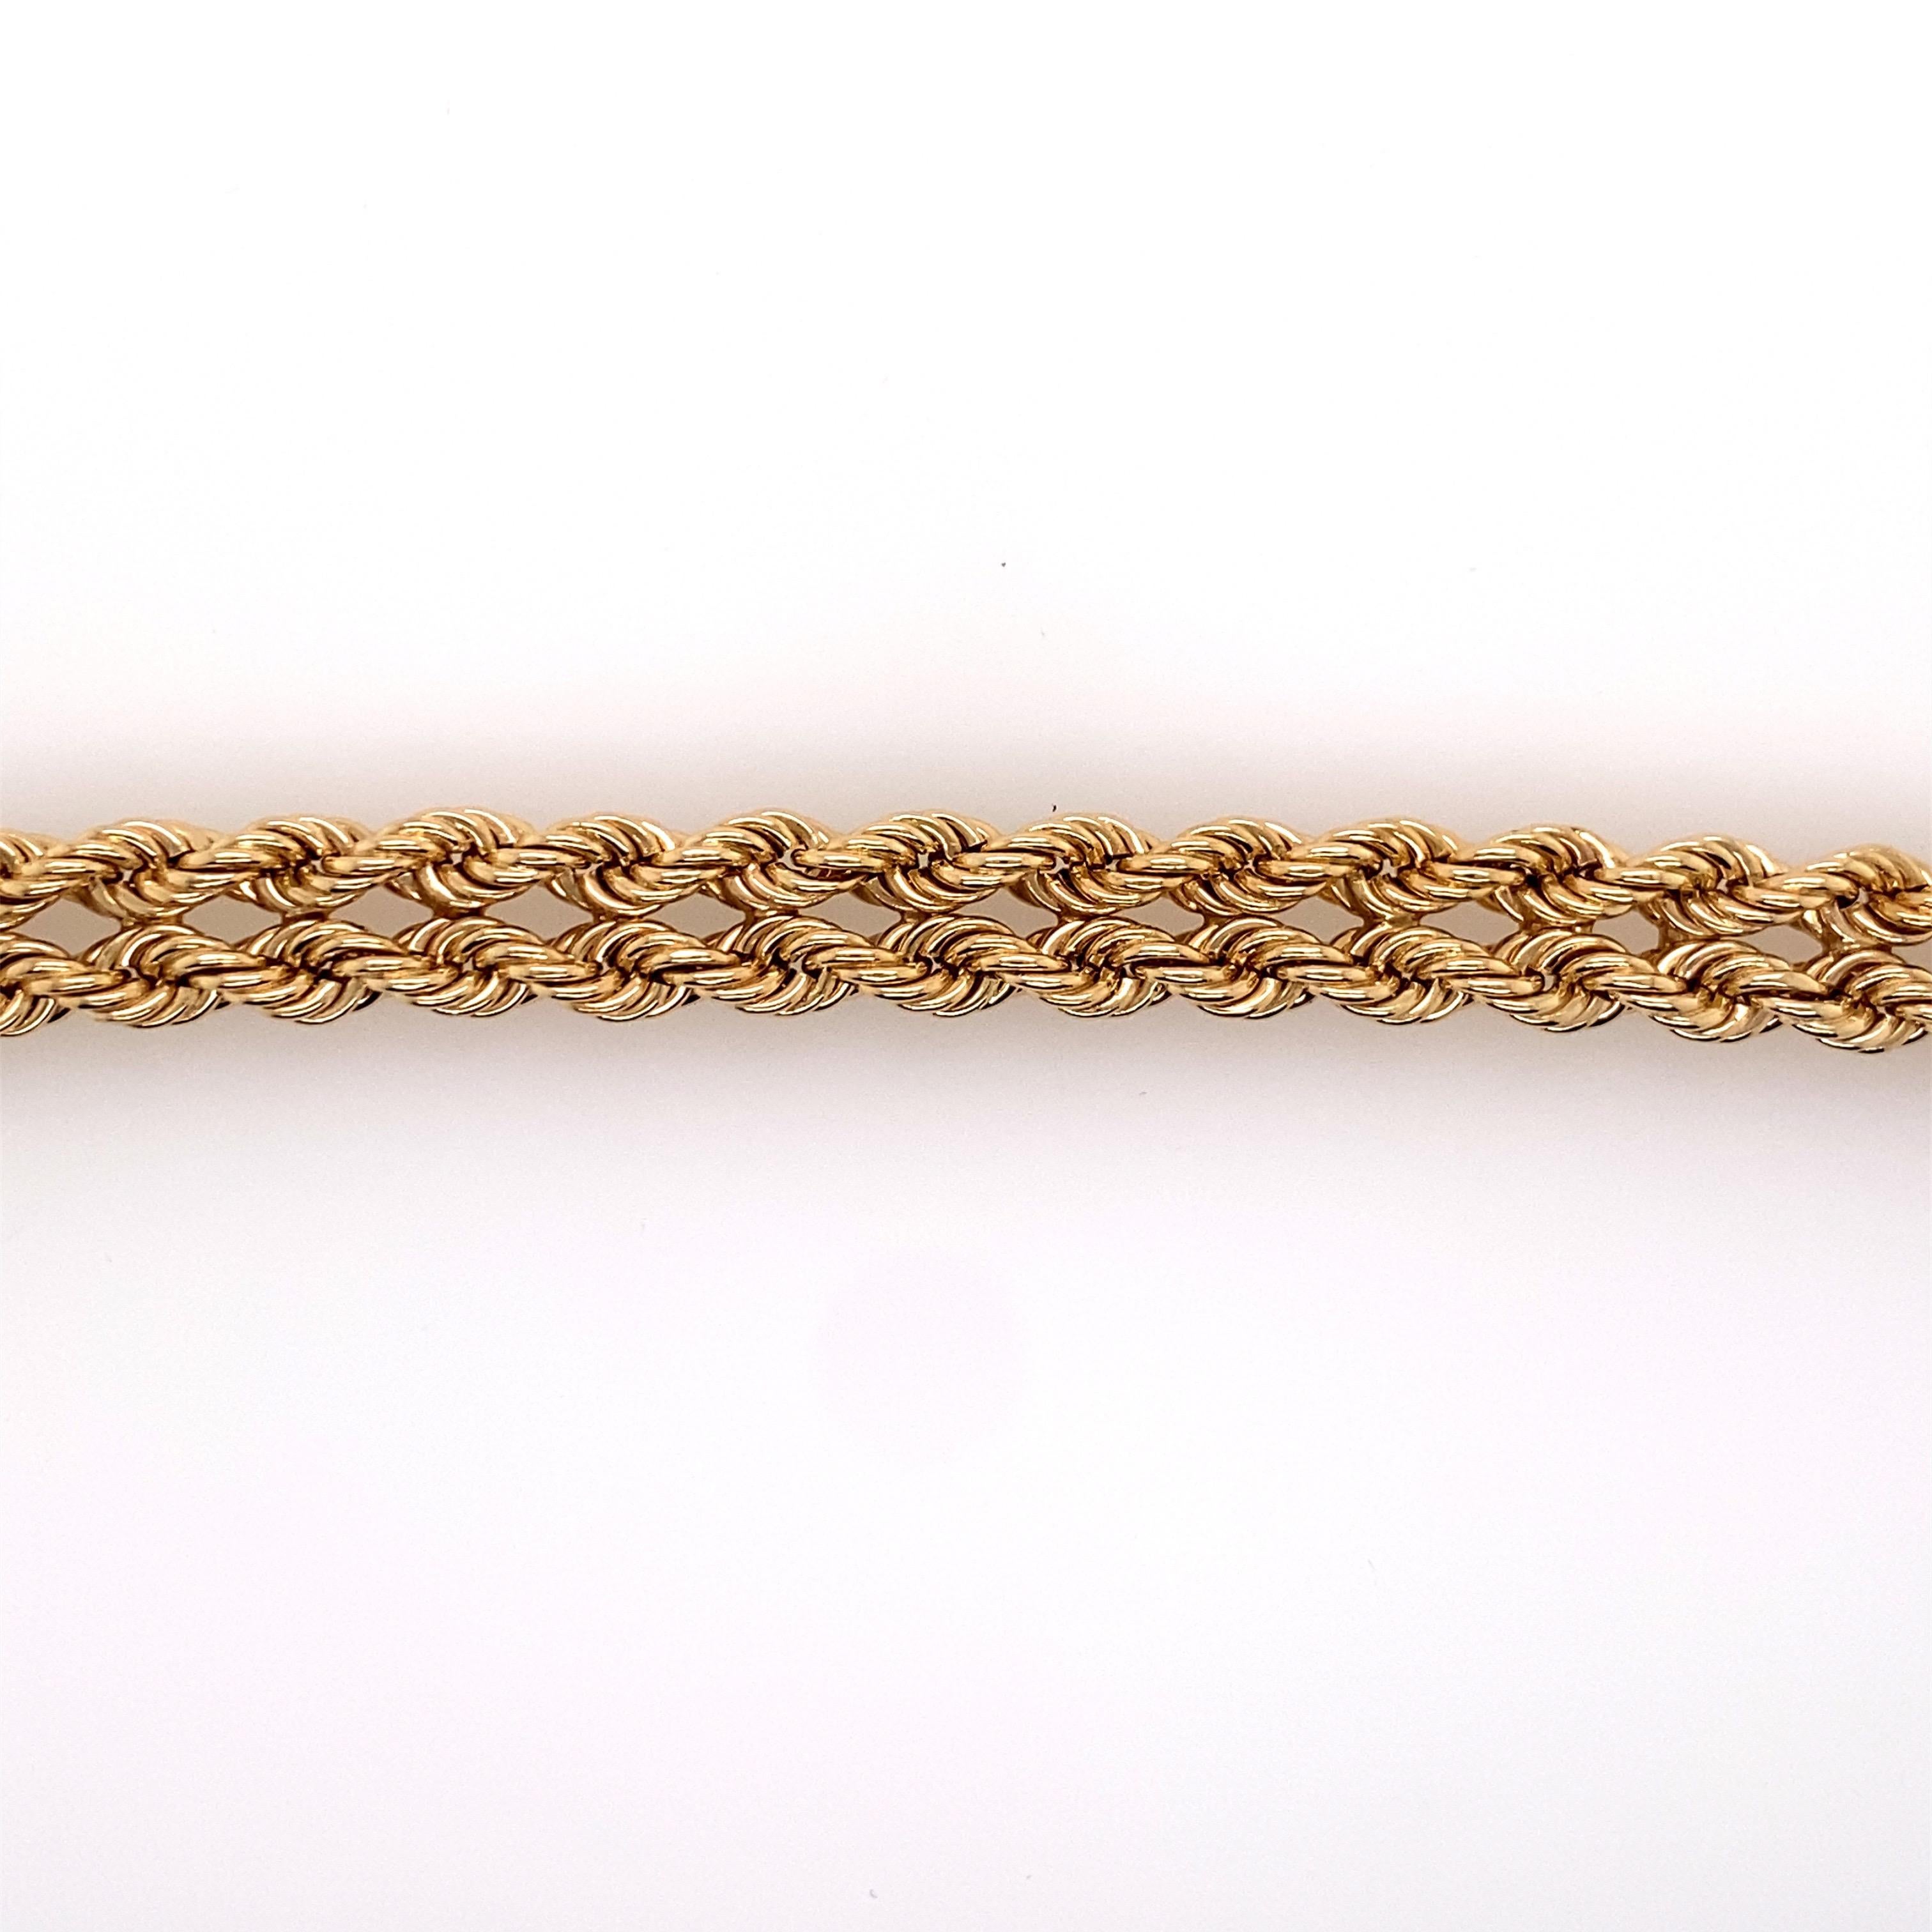 Round Cut Vintage 1970s 14KY Gold Rope Bracelet with Adjustable Diamond Buckle Clasp